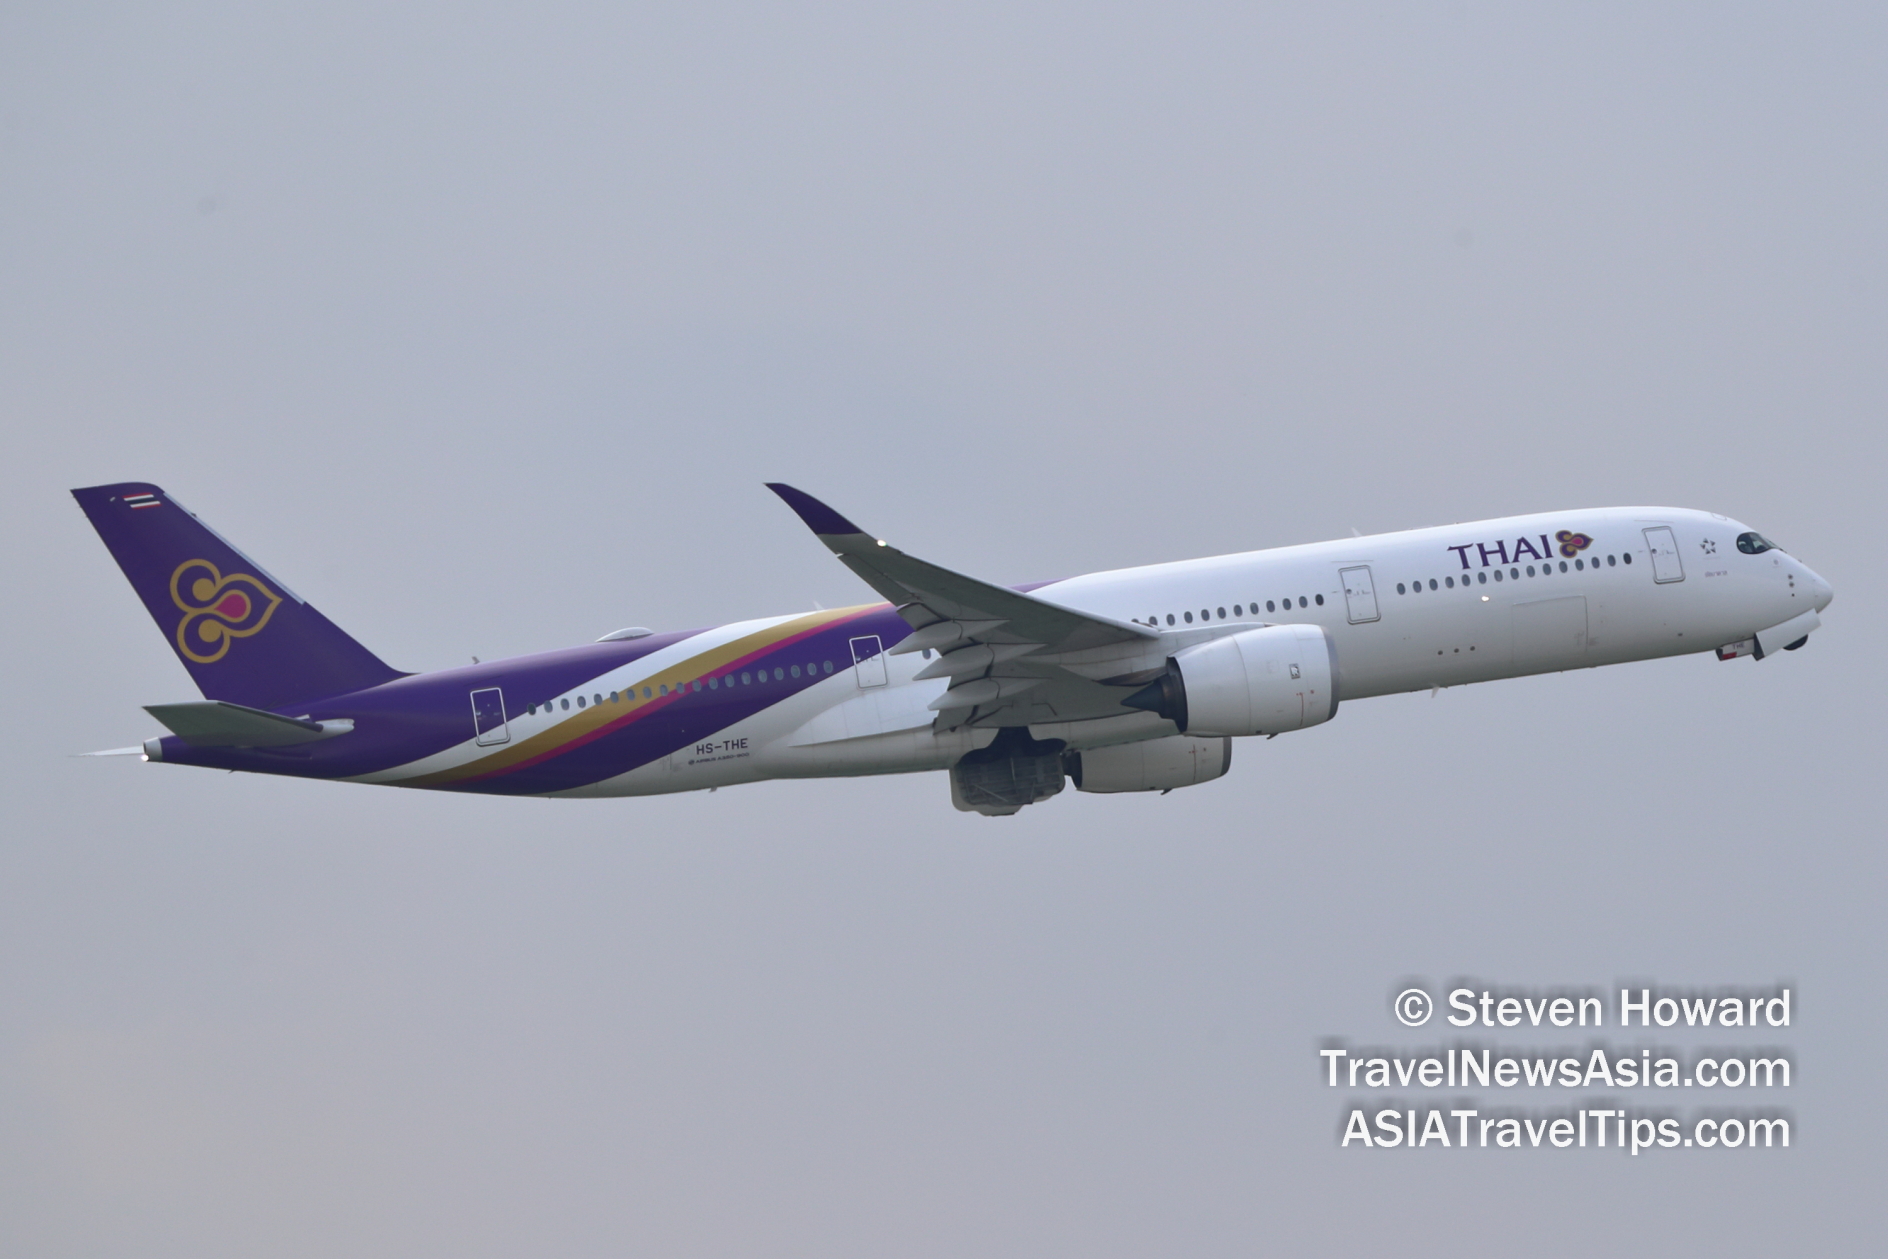 Thai Airways A350 reg: HS-THE. Picture by Steven Howard of TravelNewsAsia.com Click to enlarge.